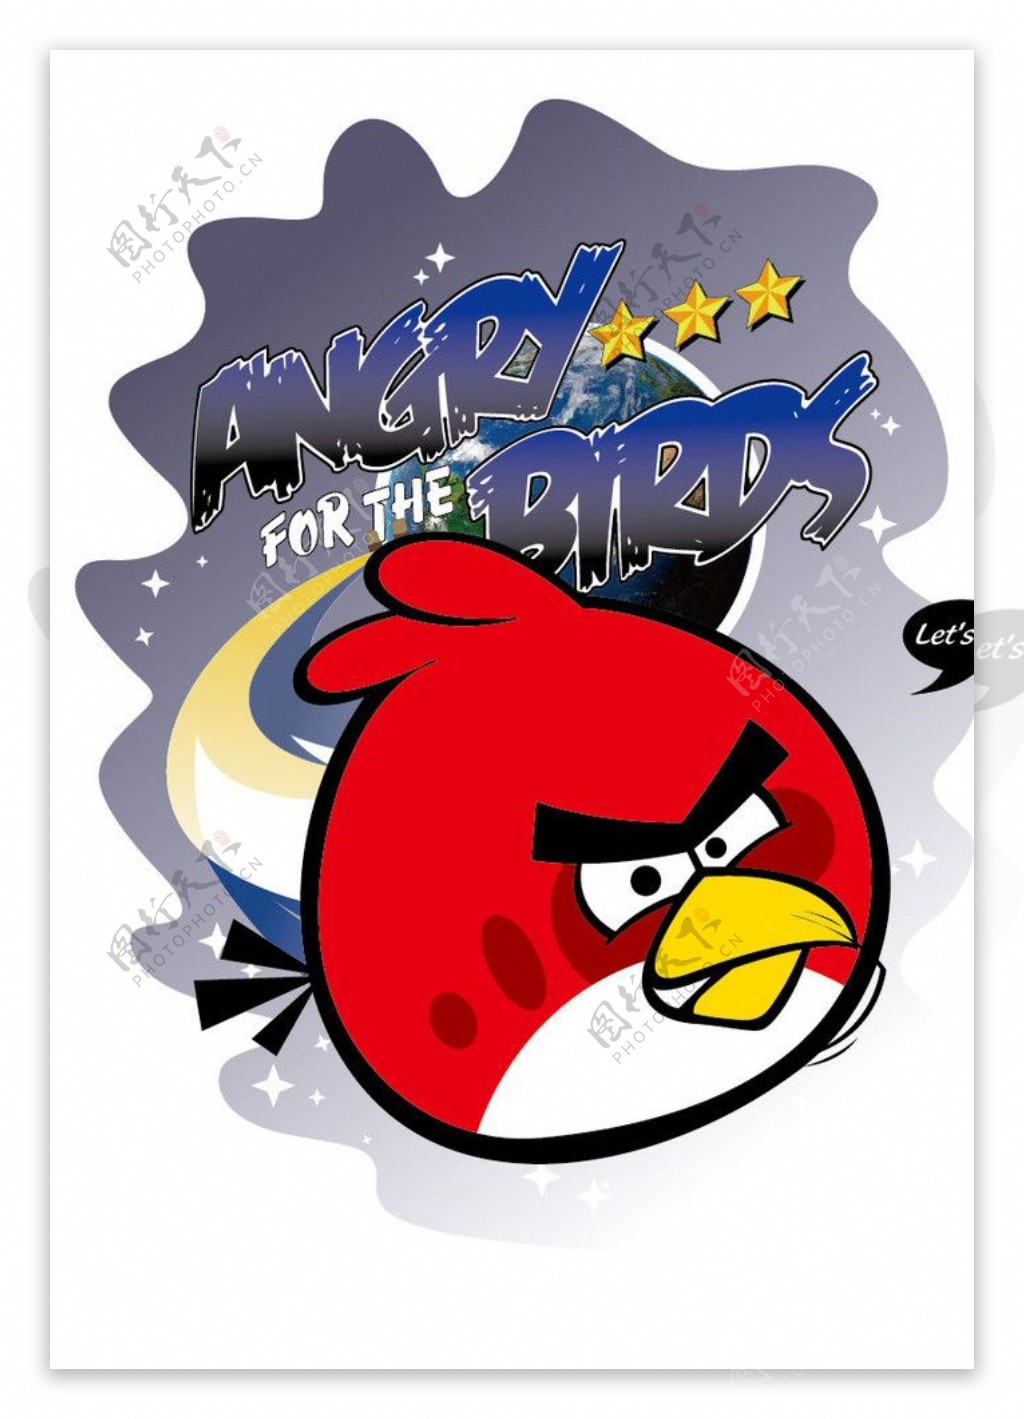 Angry Bird Icon transparent PNG - StickPNG